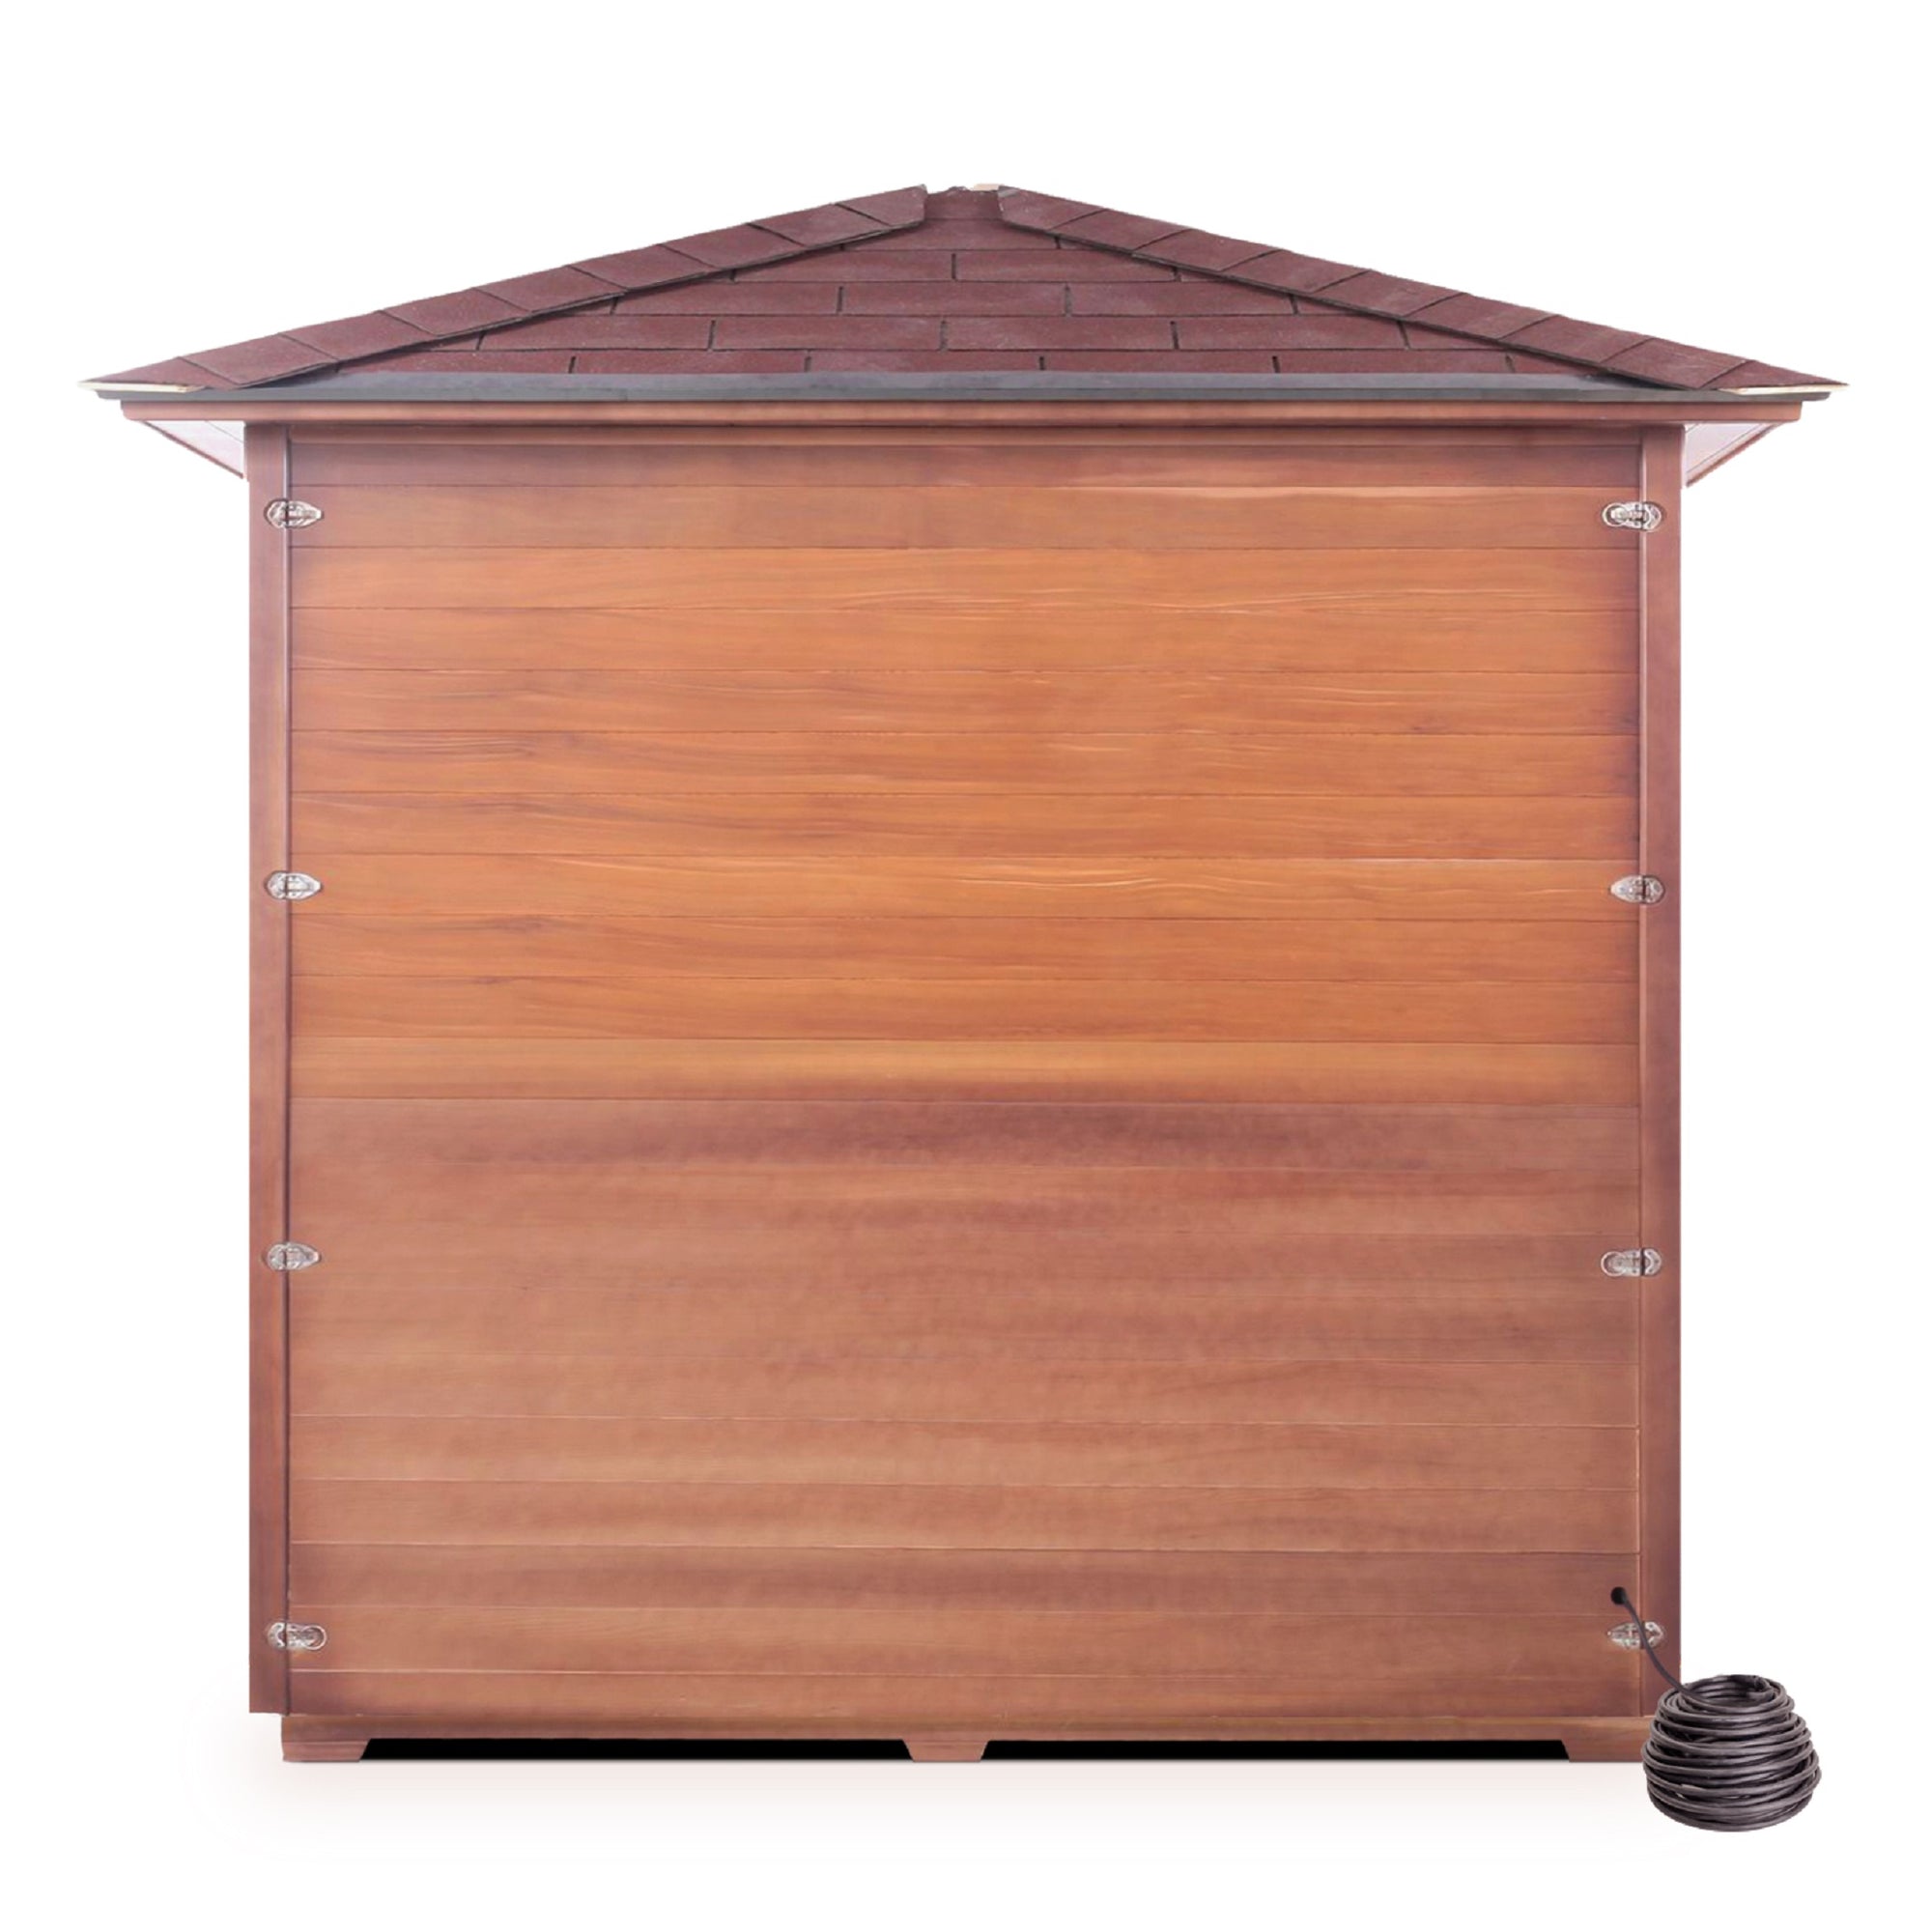 Enlighten Sauna Dry traditional SunRise Outdoor Canadian Red Cedar Wood Outside And Inside Peak Roofed with glass door and windows five person sauna front view